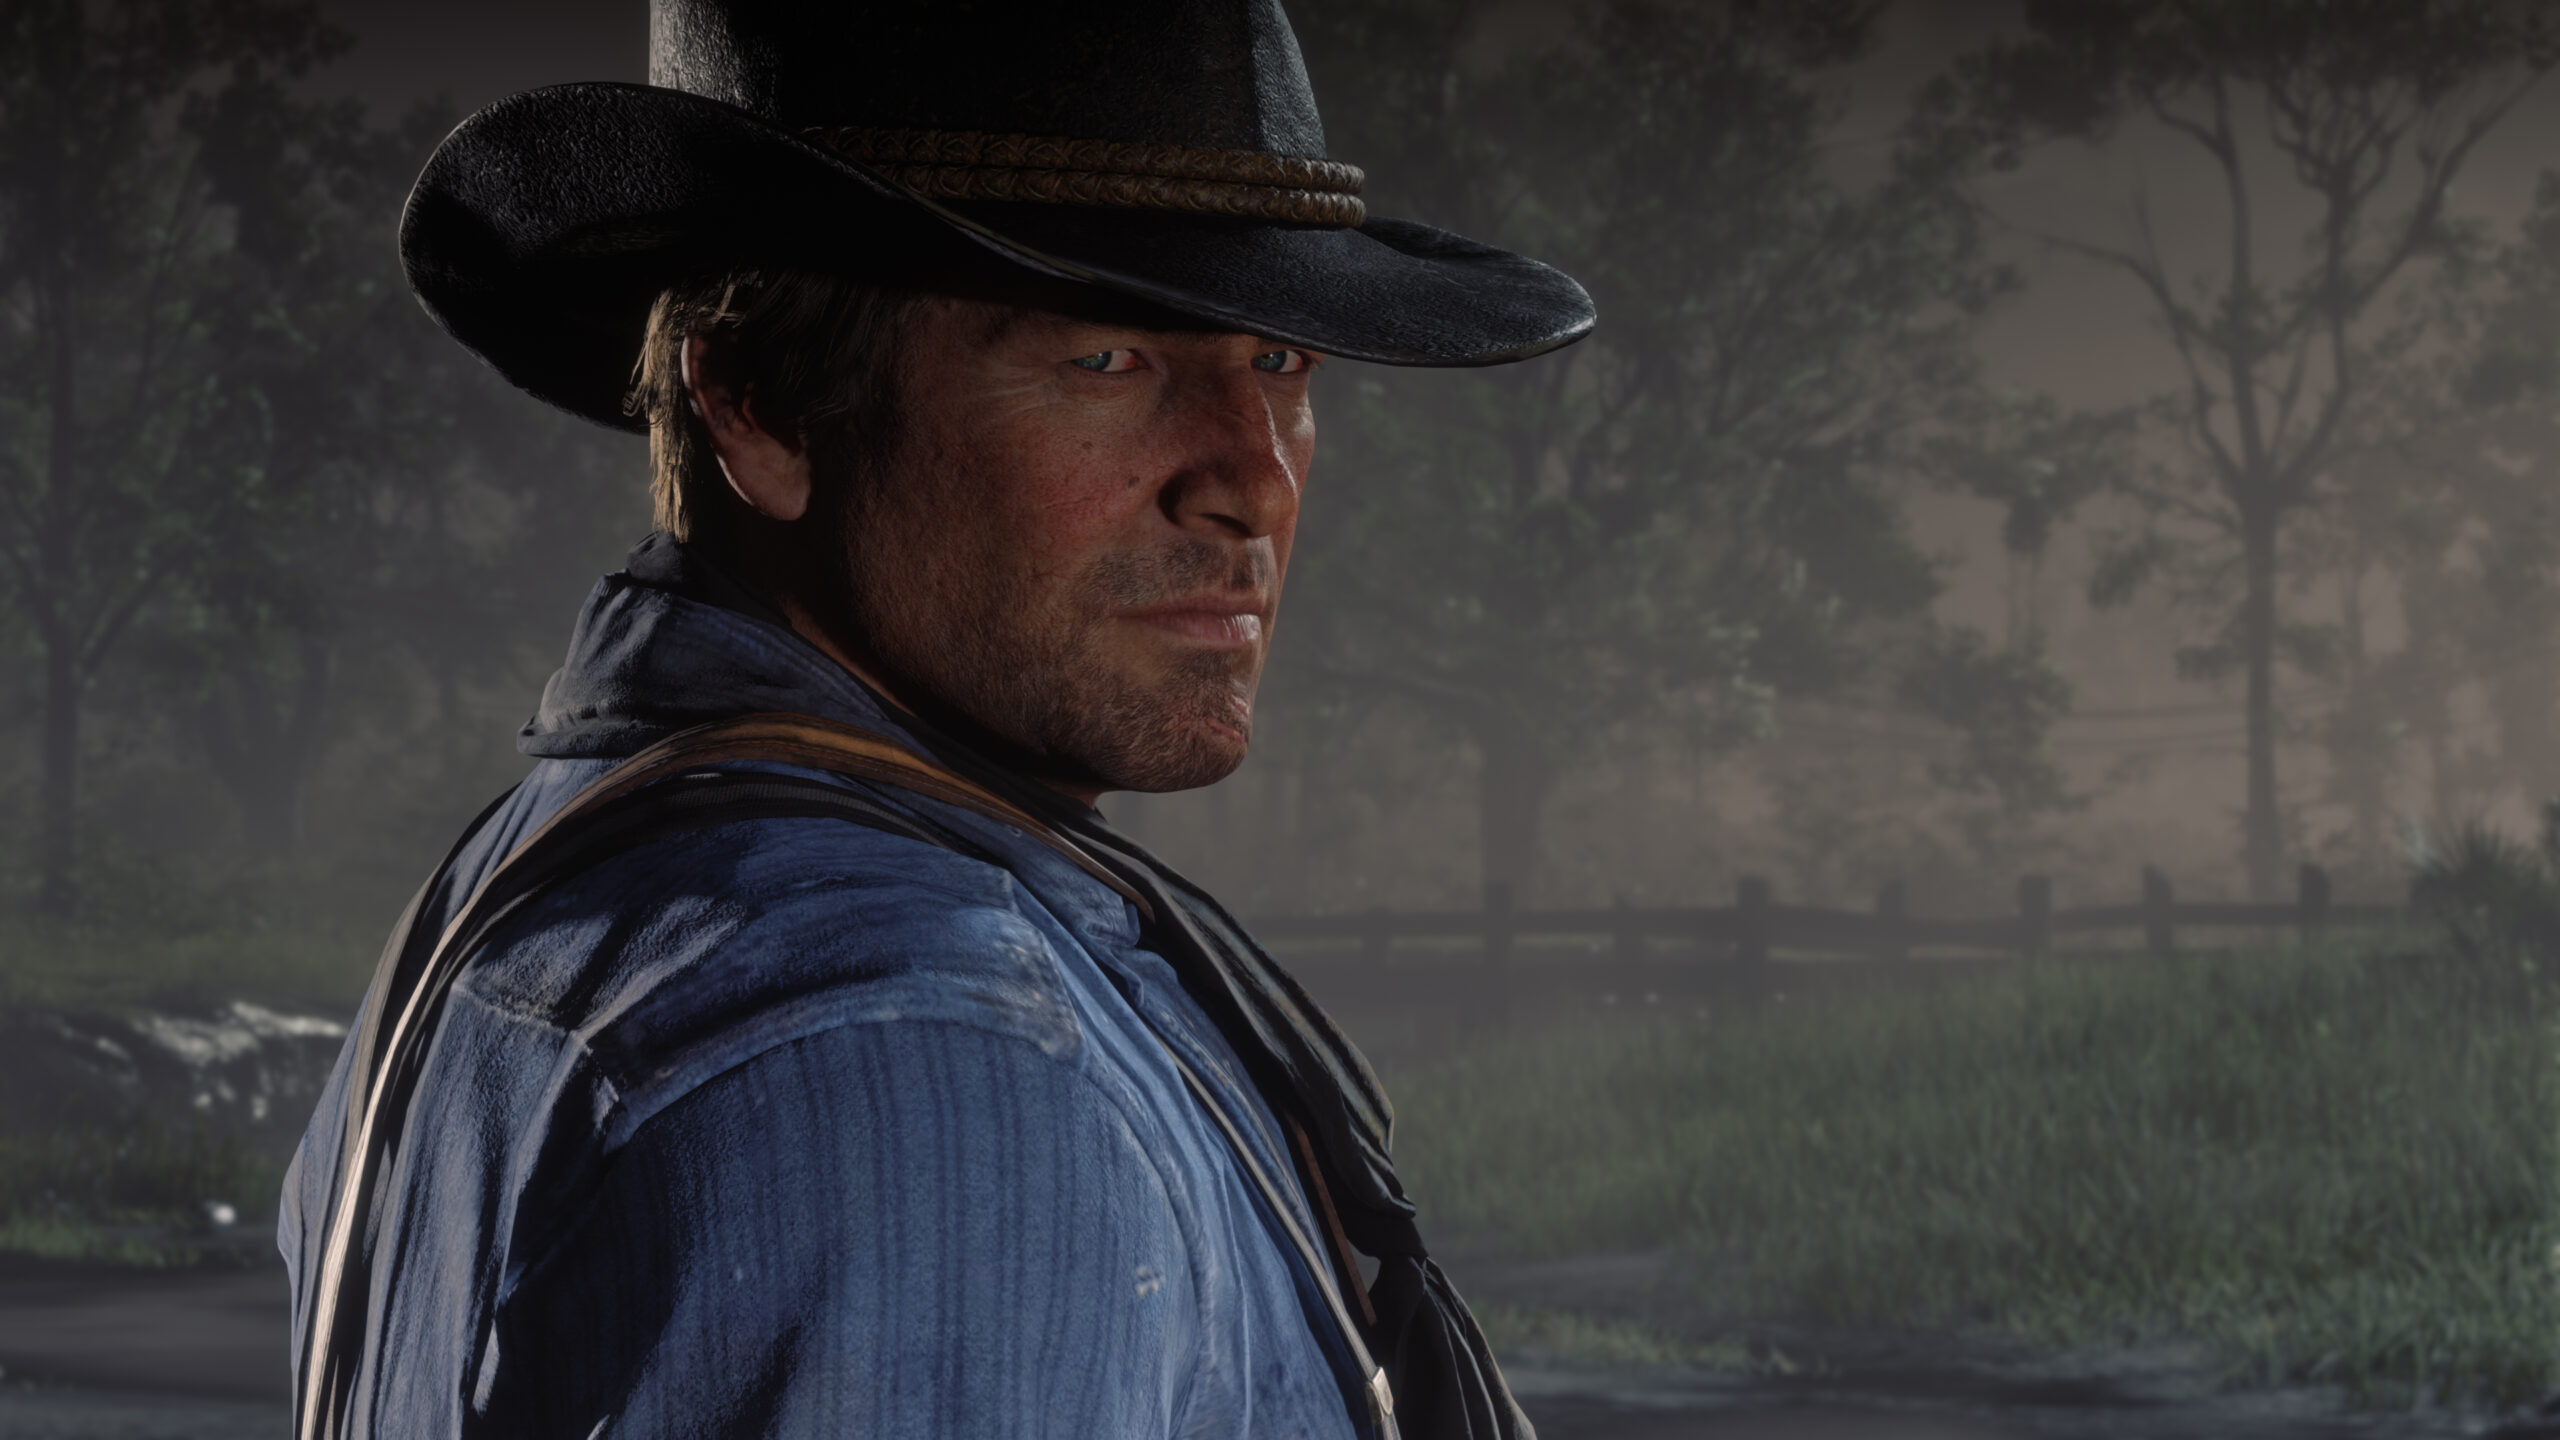 New Red Dead Redemption 2 Update 1.32 Adds HDR10+ and Updates AMD FSR to Version 2.2